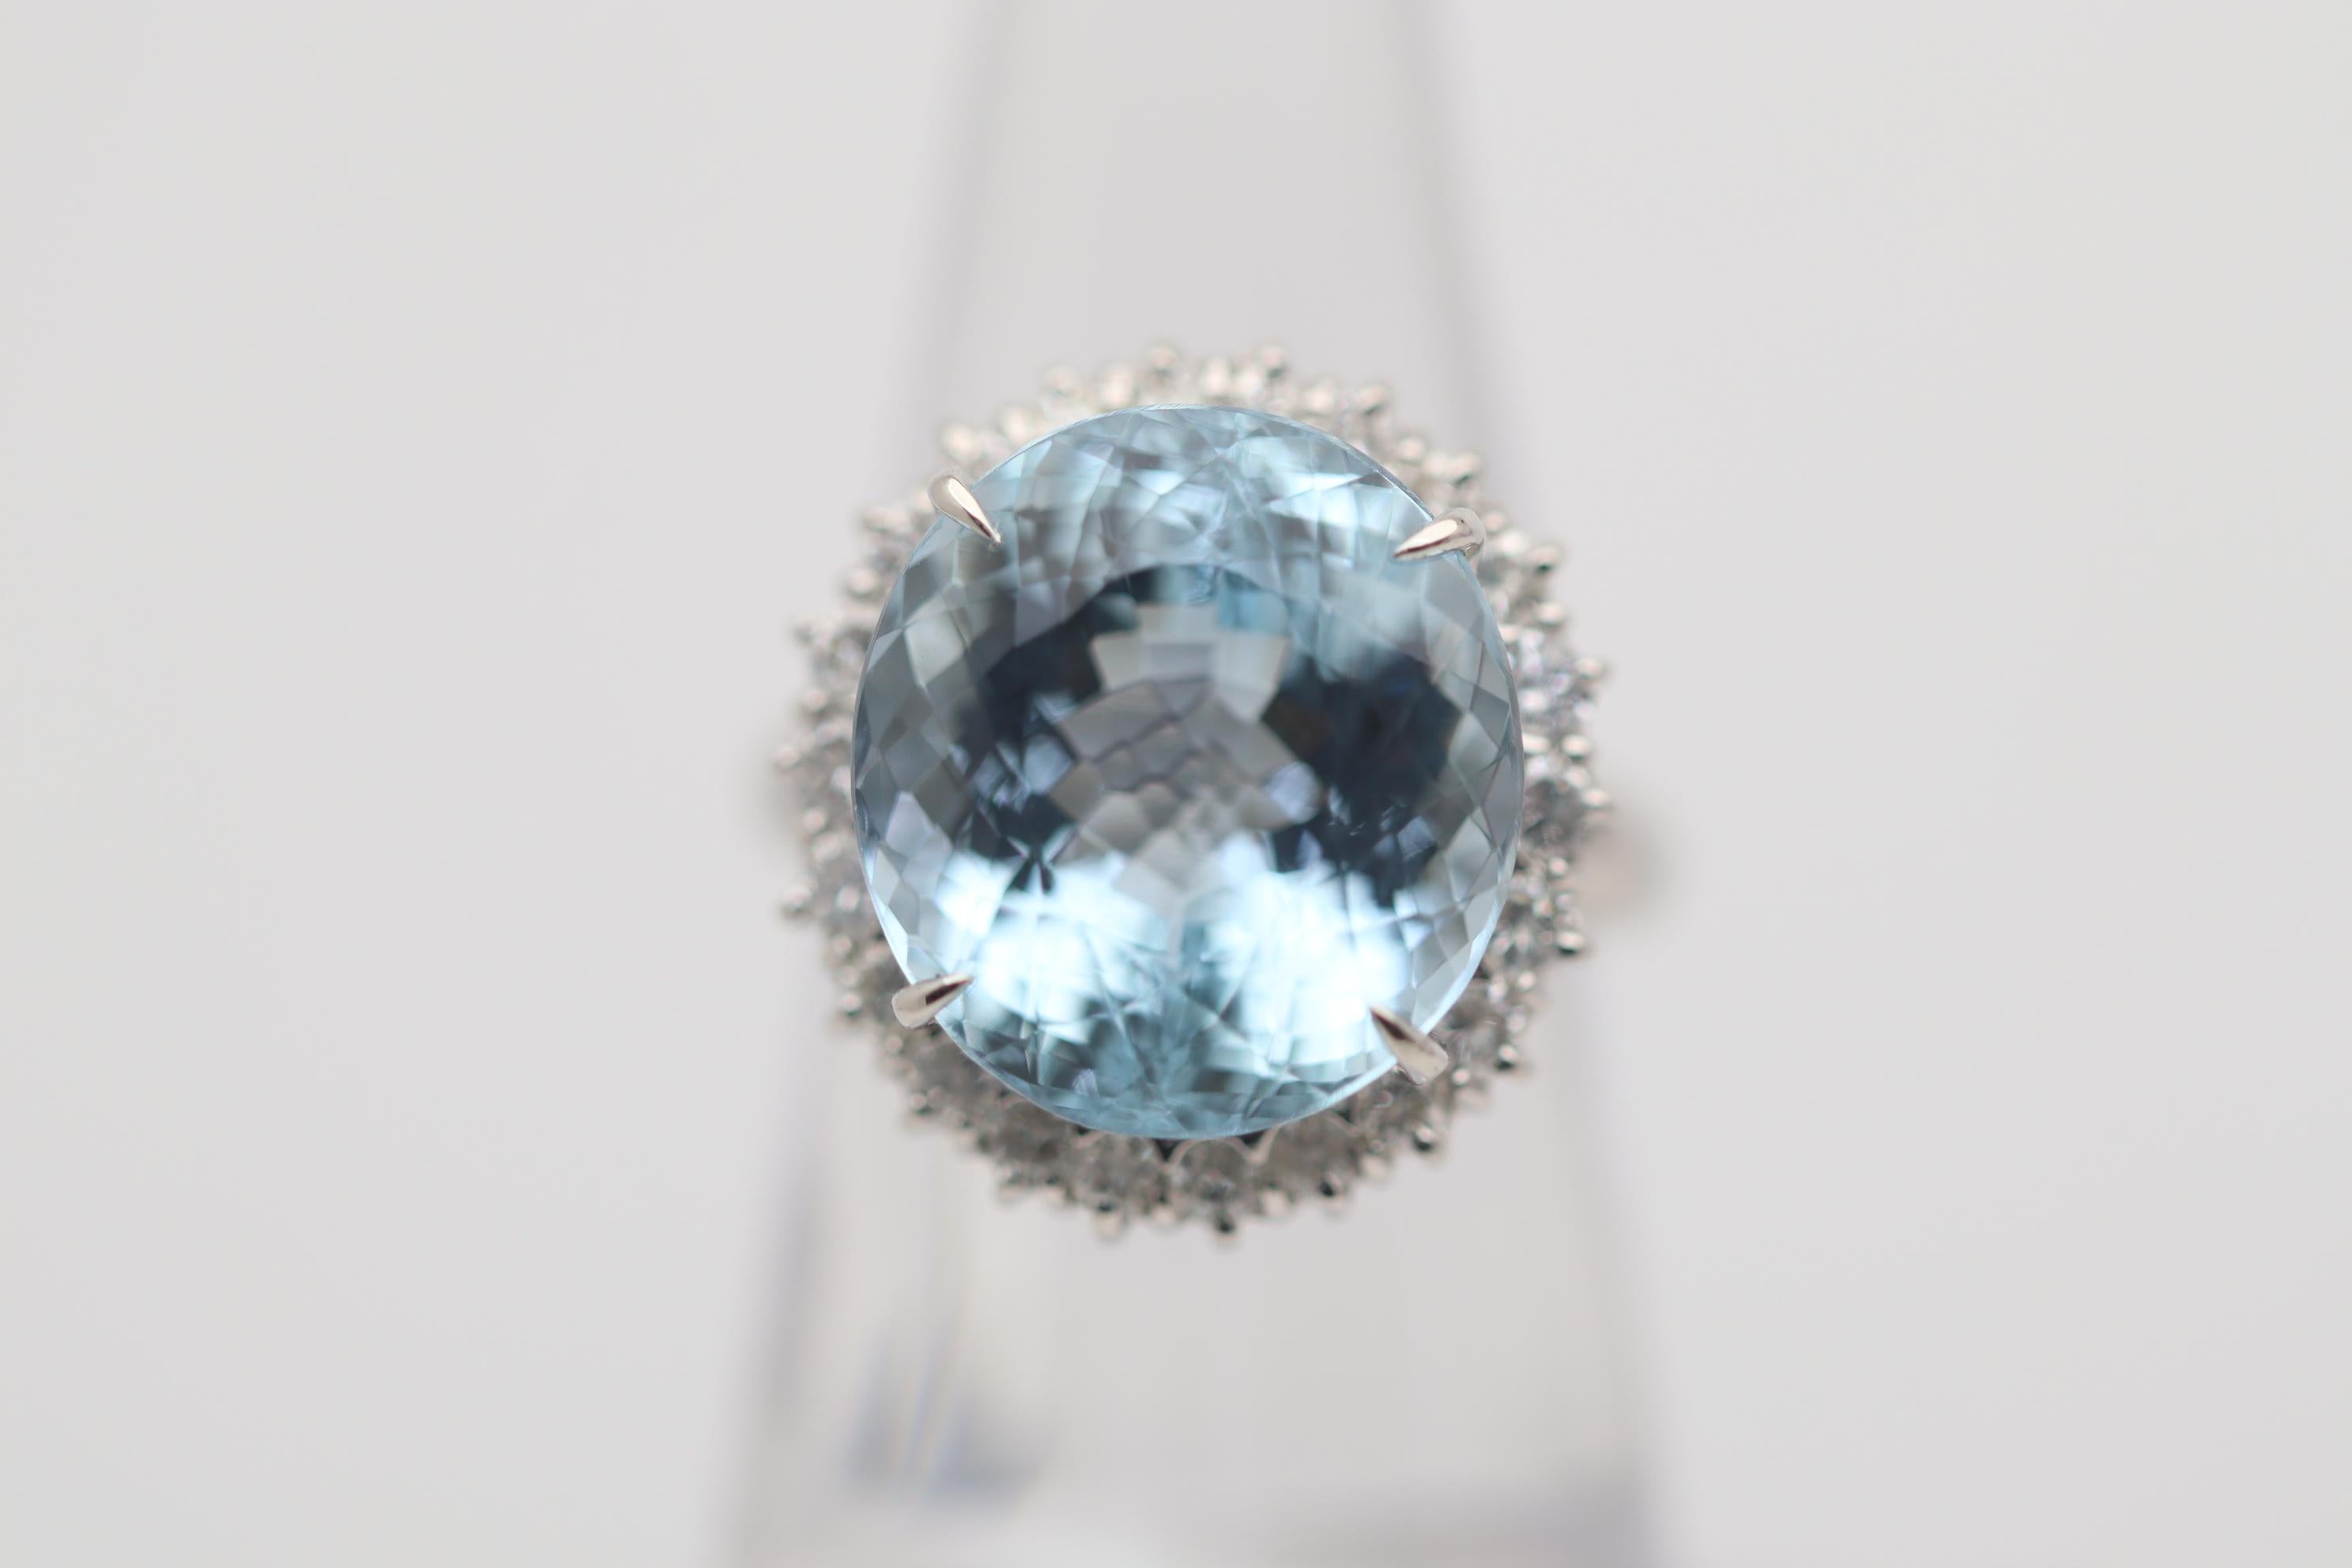 A stunning aquamarine with the ideal rich sea-blue color takes center stage. It weighs an impressive 14.52 carats and has a special cut (Portuguese-cut) which increases the stone's brilliance and sparkle. It is complemented by a halo of round